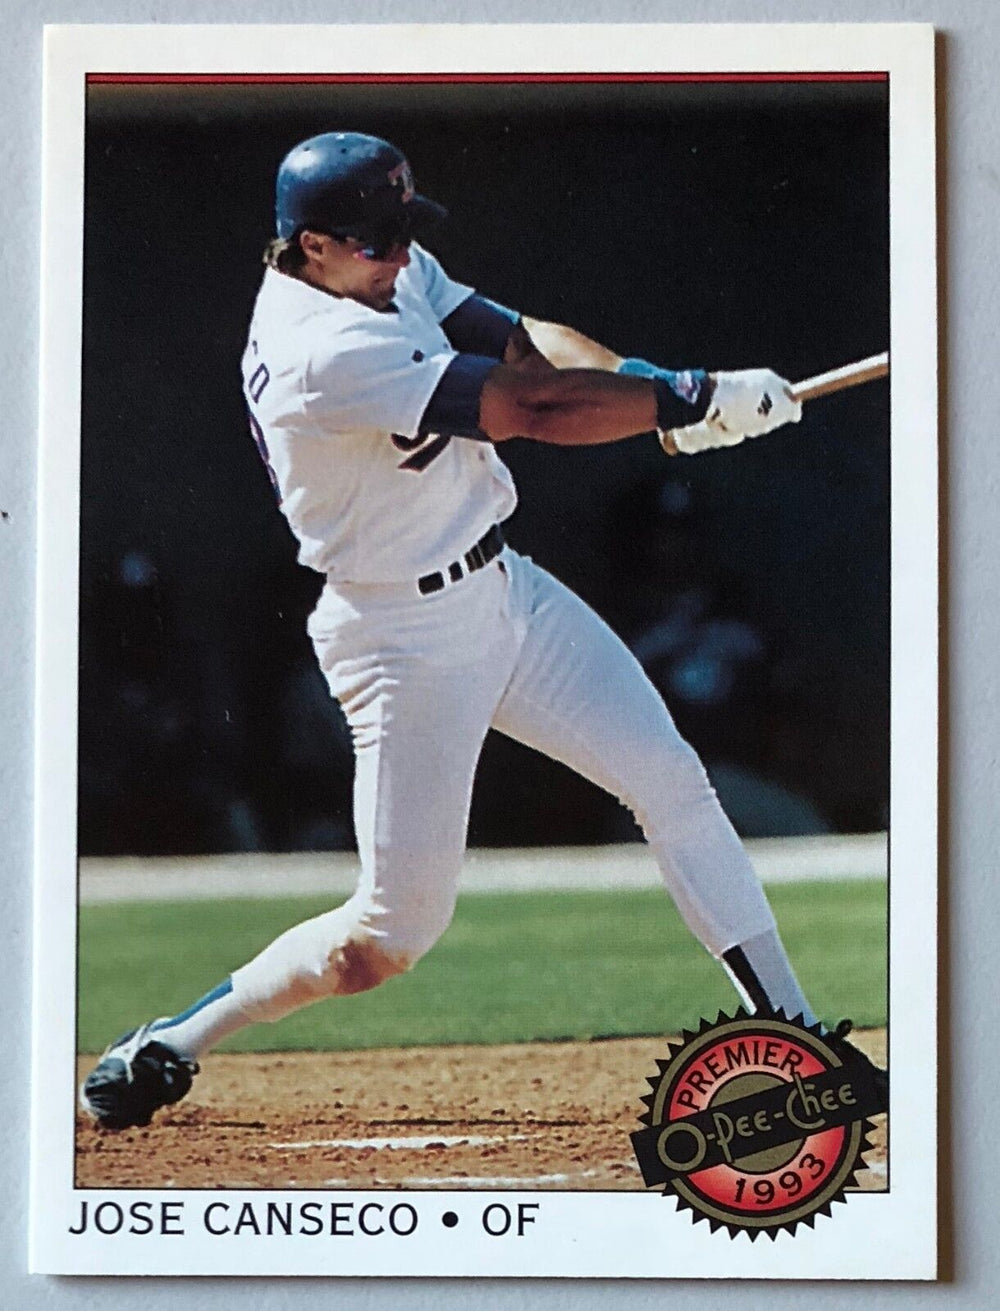 Jose Canseco 1993 O-Pee-Chee Premier Series Mint Card #81